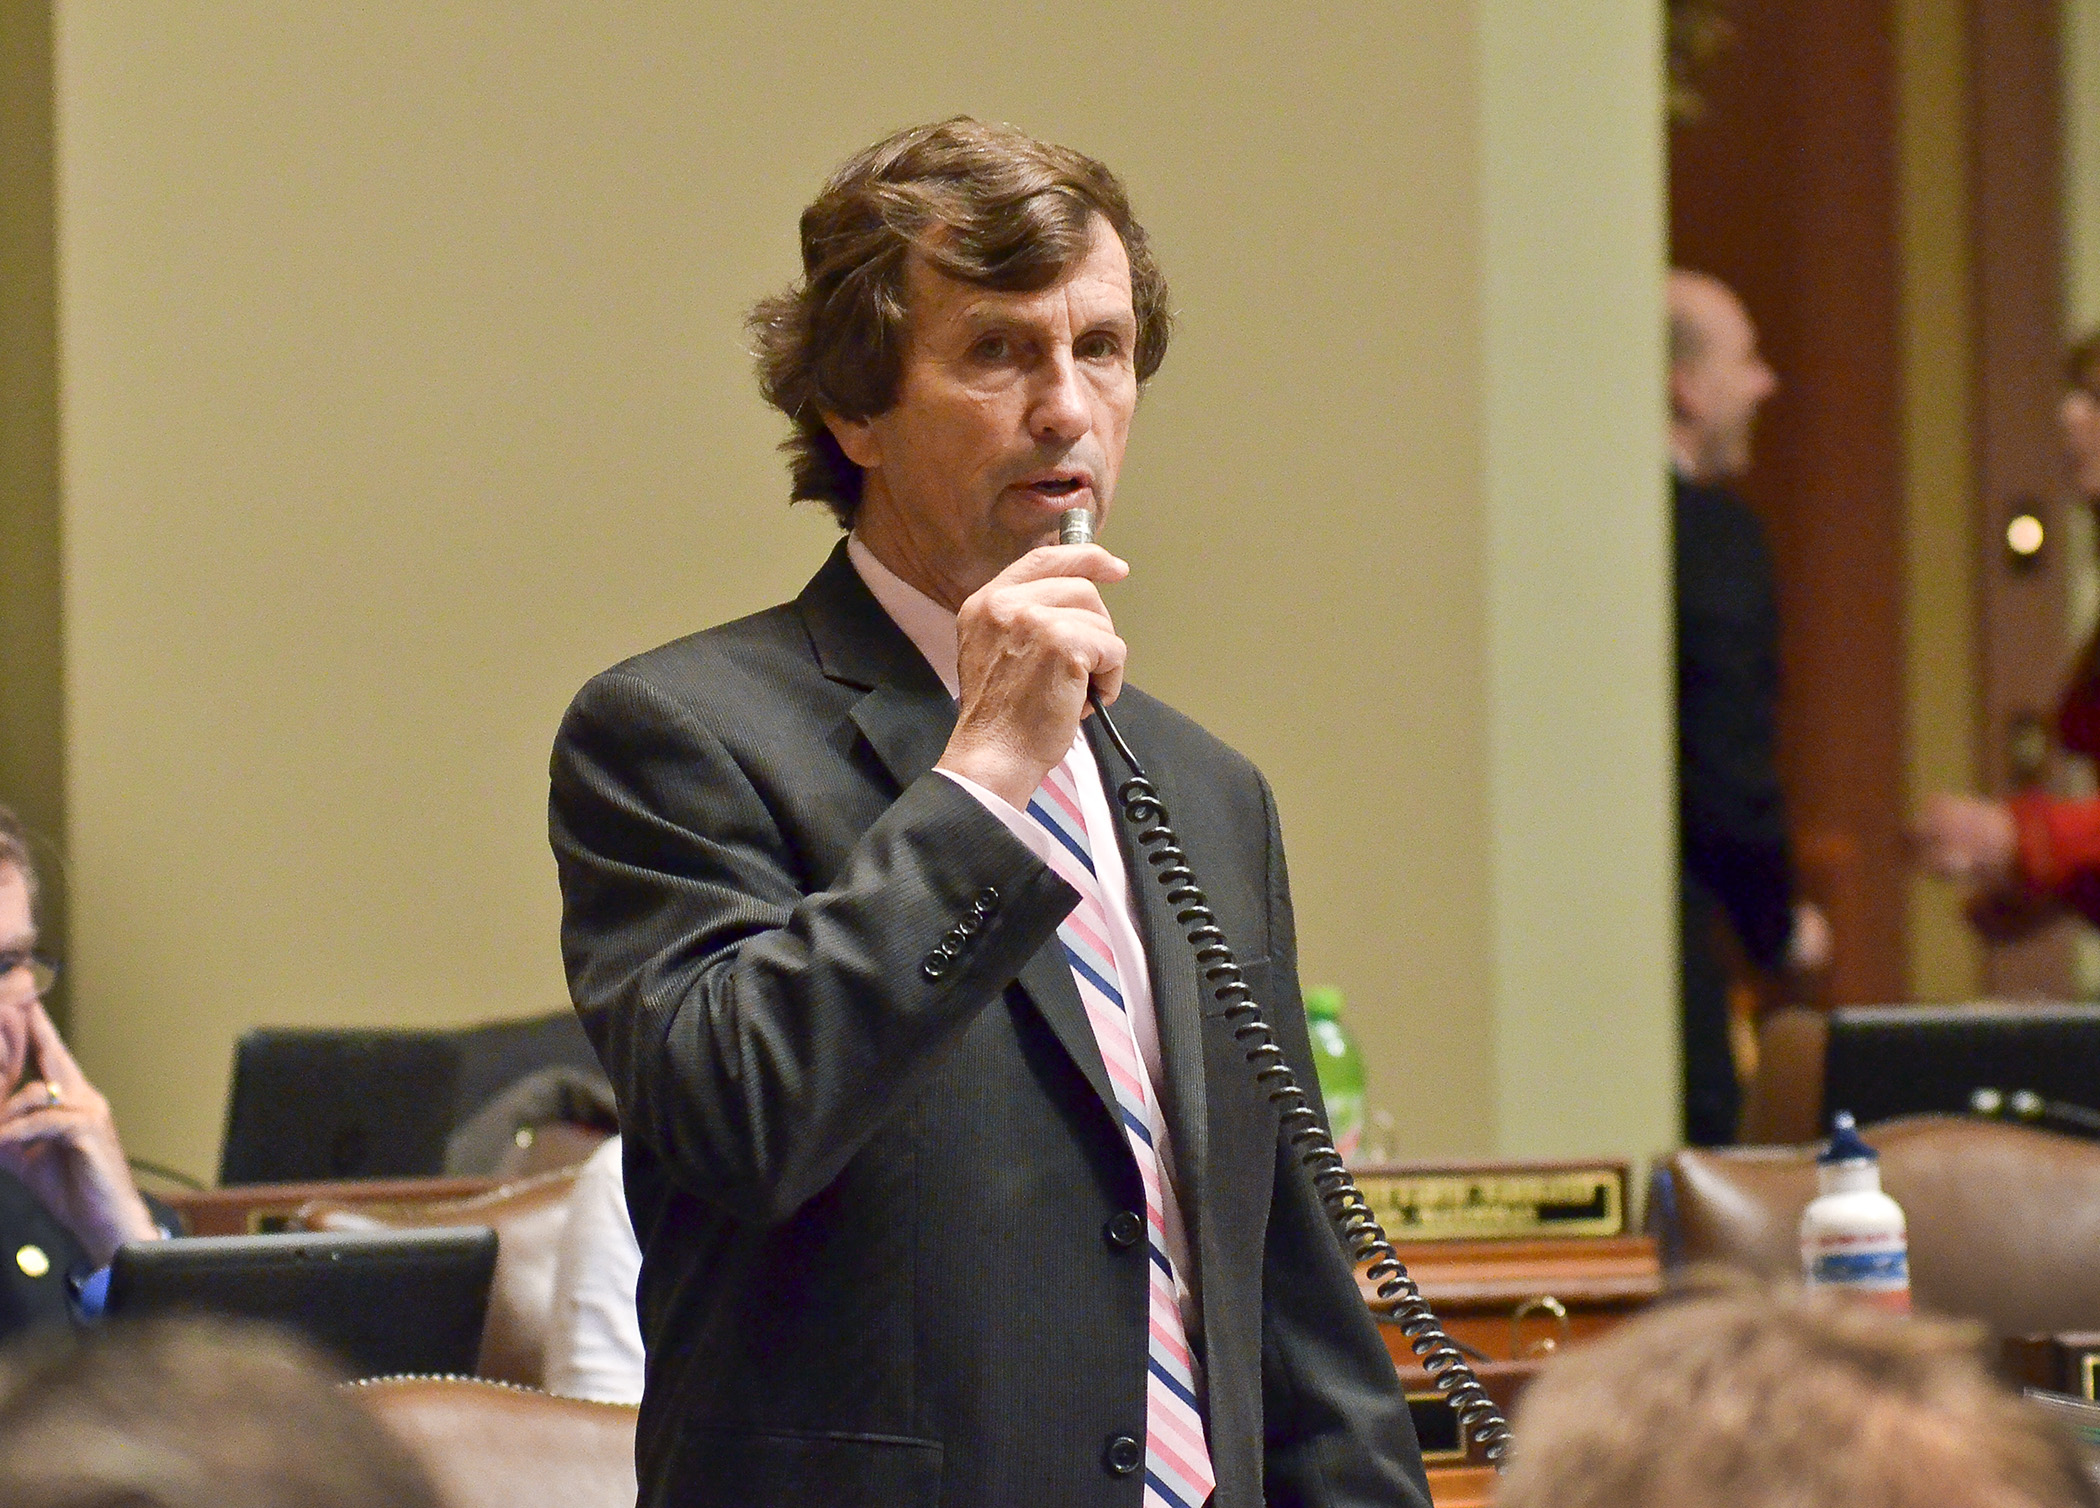 Rep. Denny McNamara speaks to the omnibus environment, natural resources and agriculture policy and finance bill on the House floor May 18. Photo by Andrew Vonbank